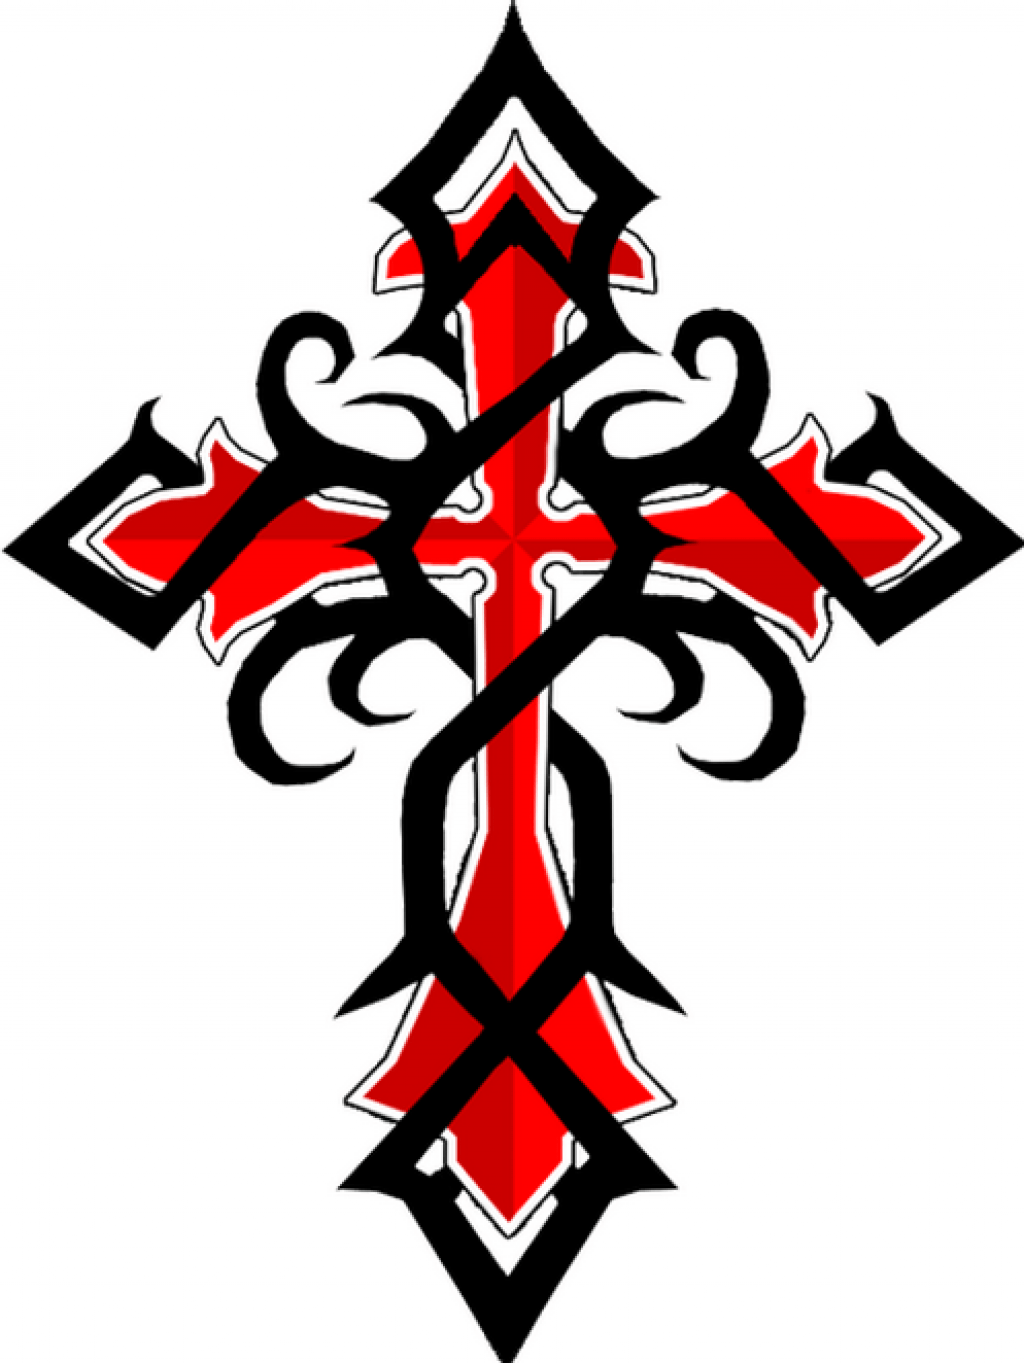 Cool Red X Logo - Black Tribal And Red Cross Tattoo Design